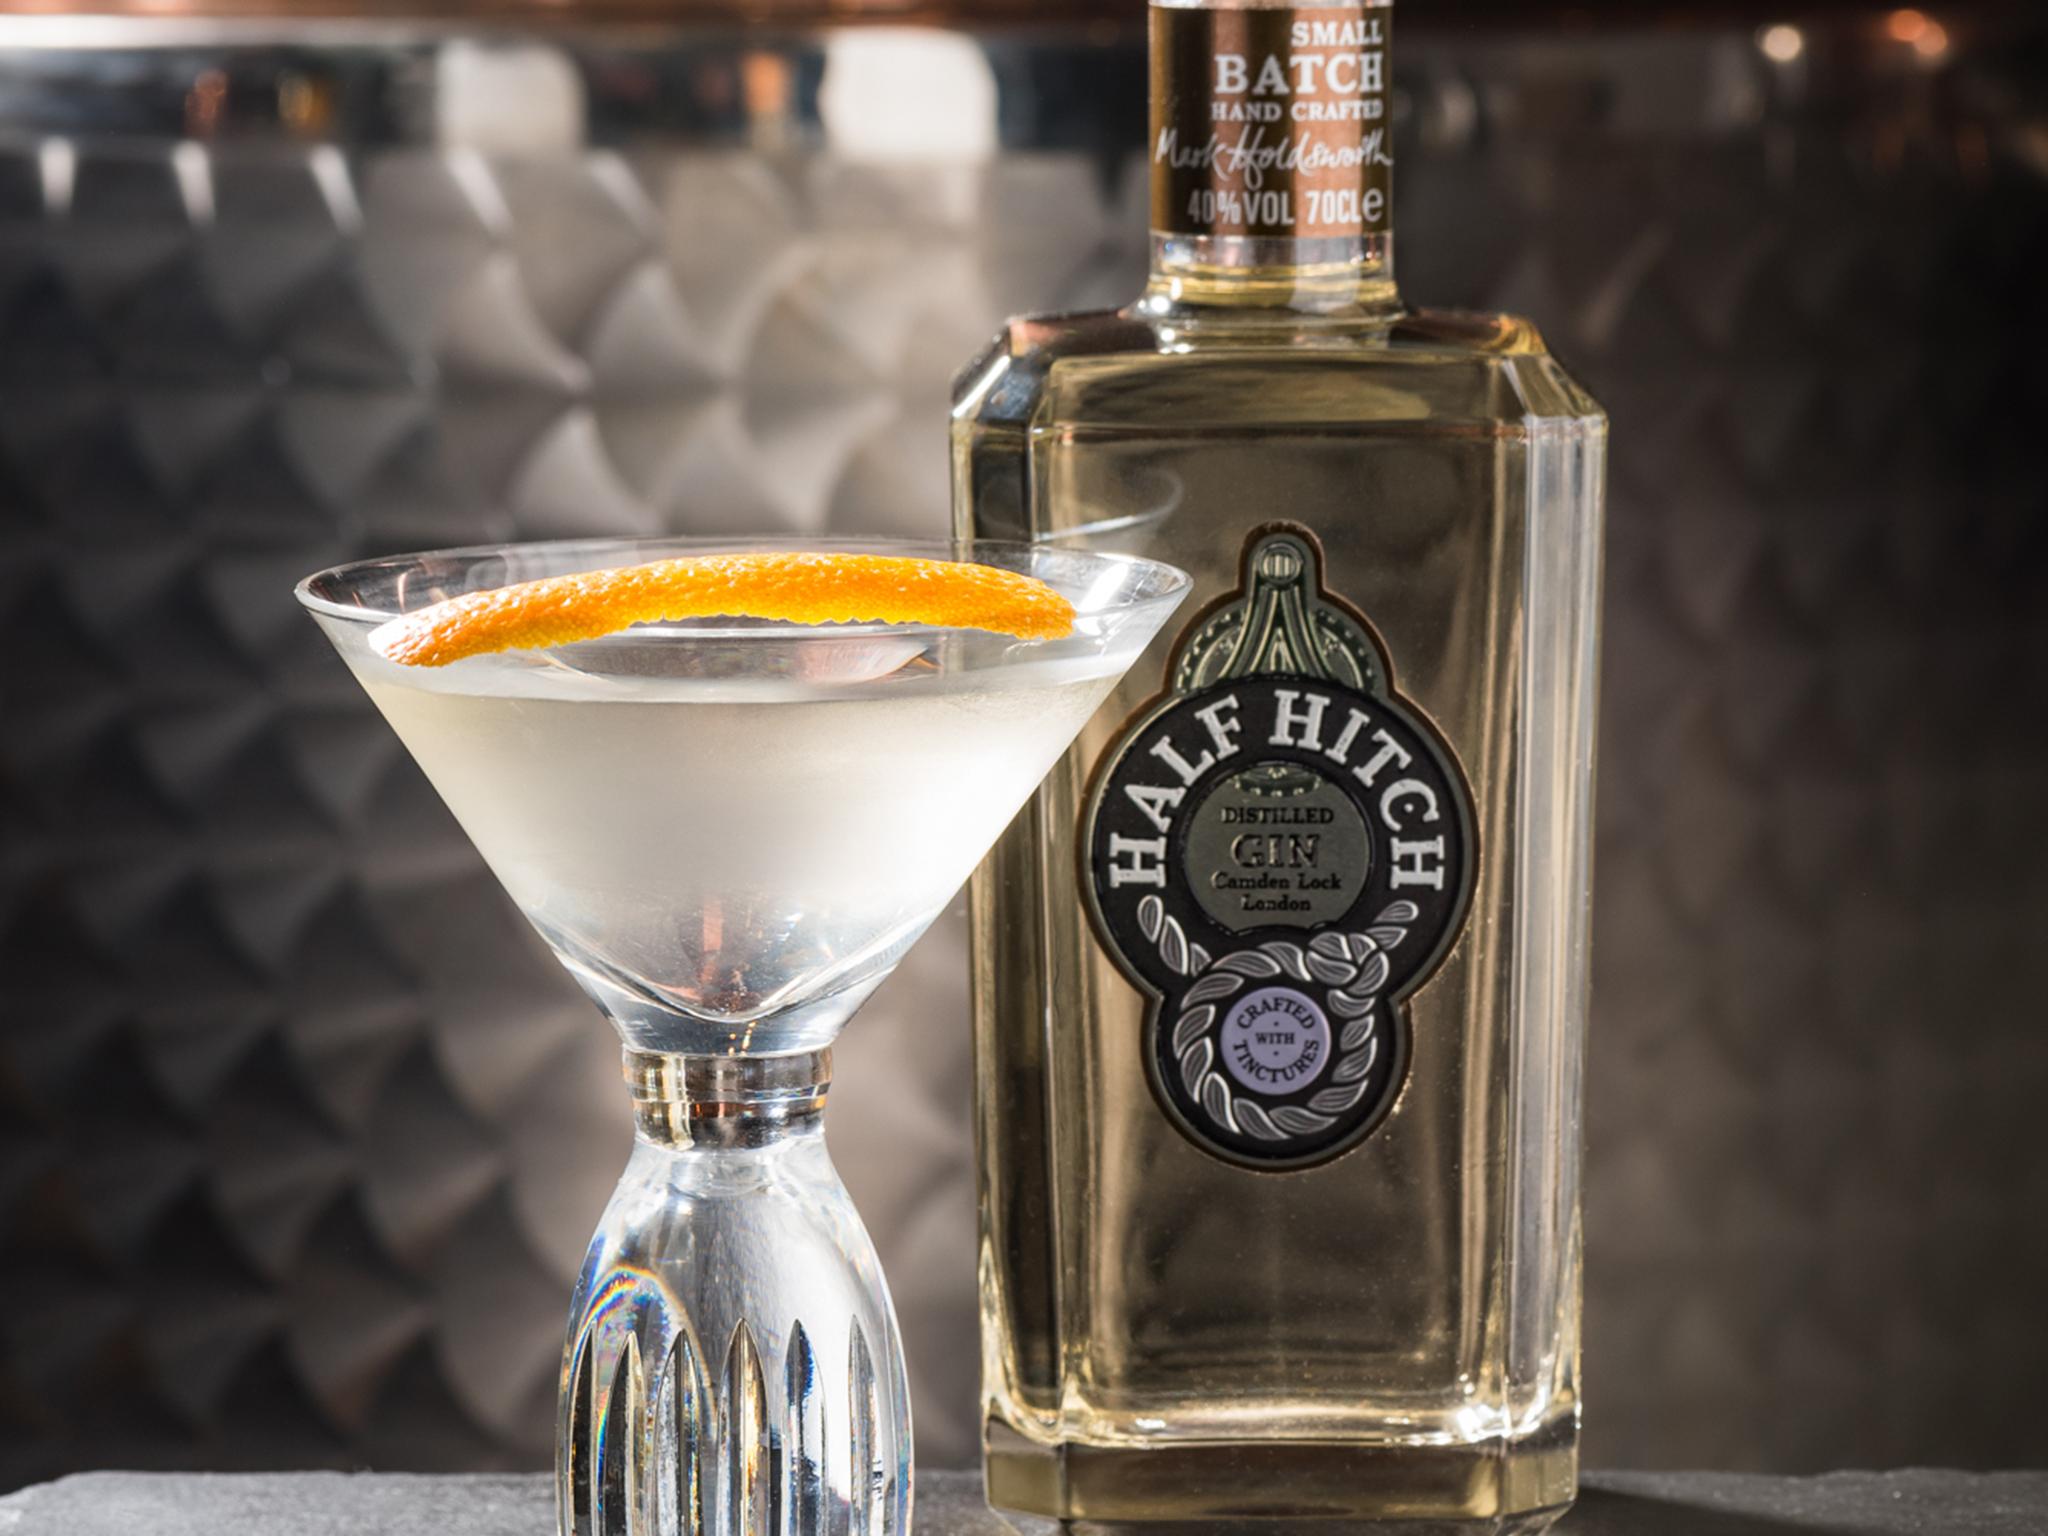 Half Hitch is the first gin distillery to open in Camden in 50 years